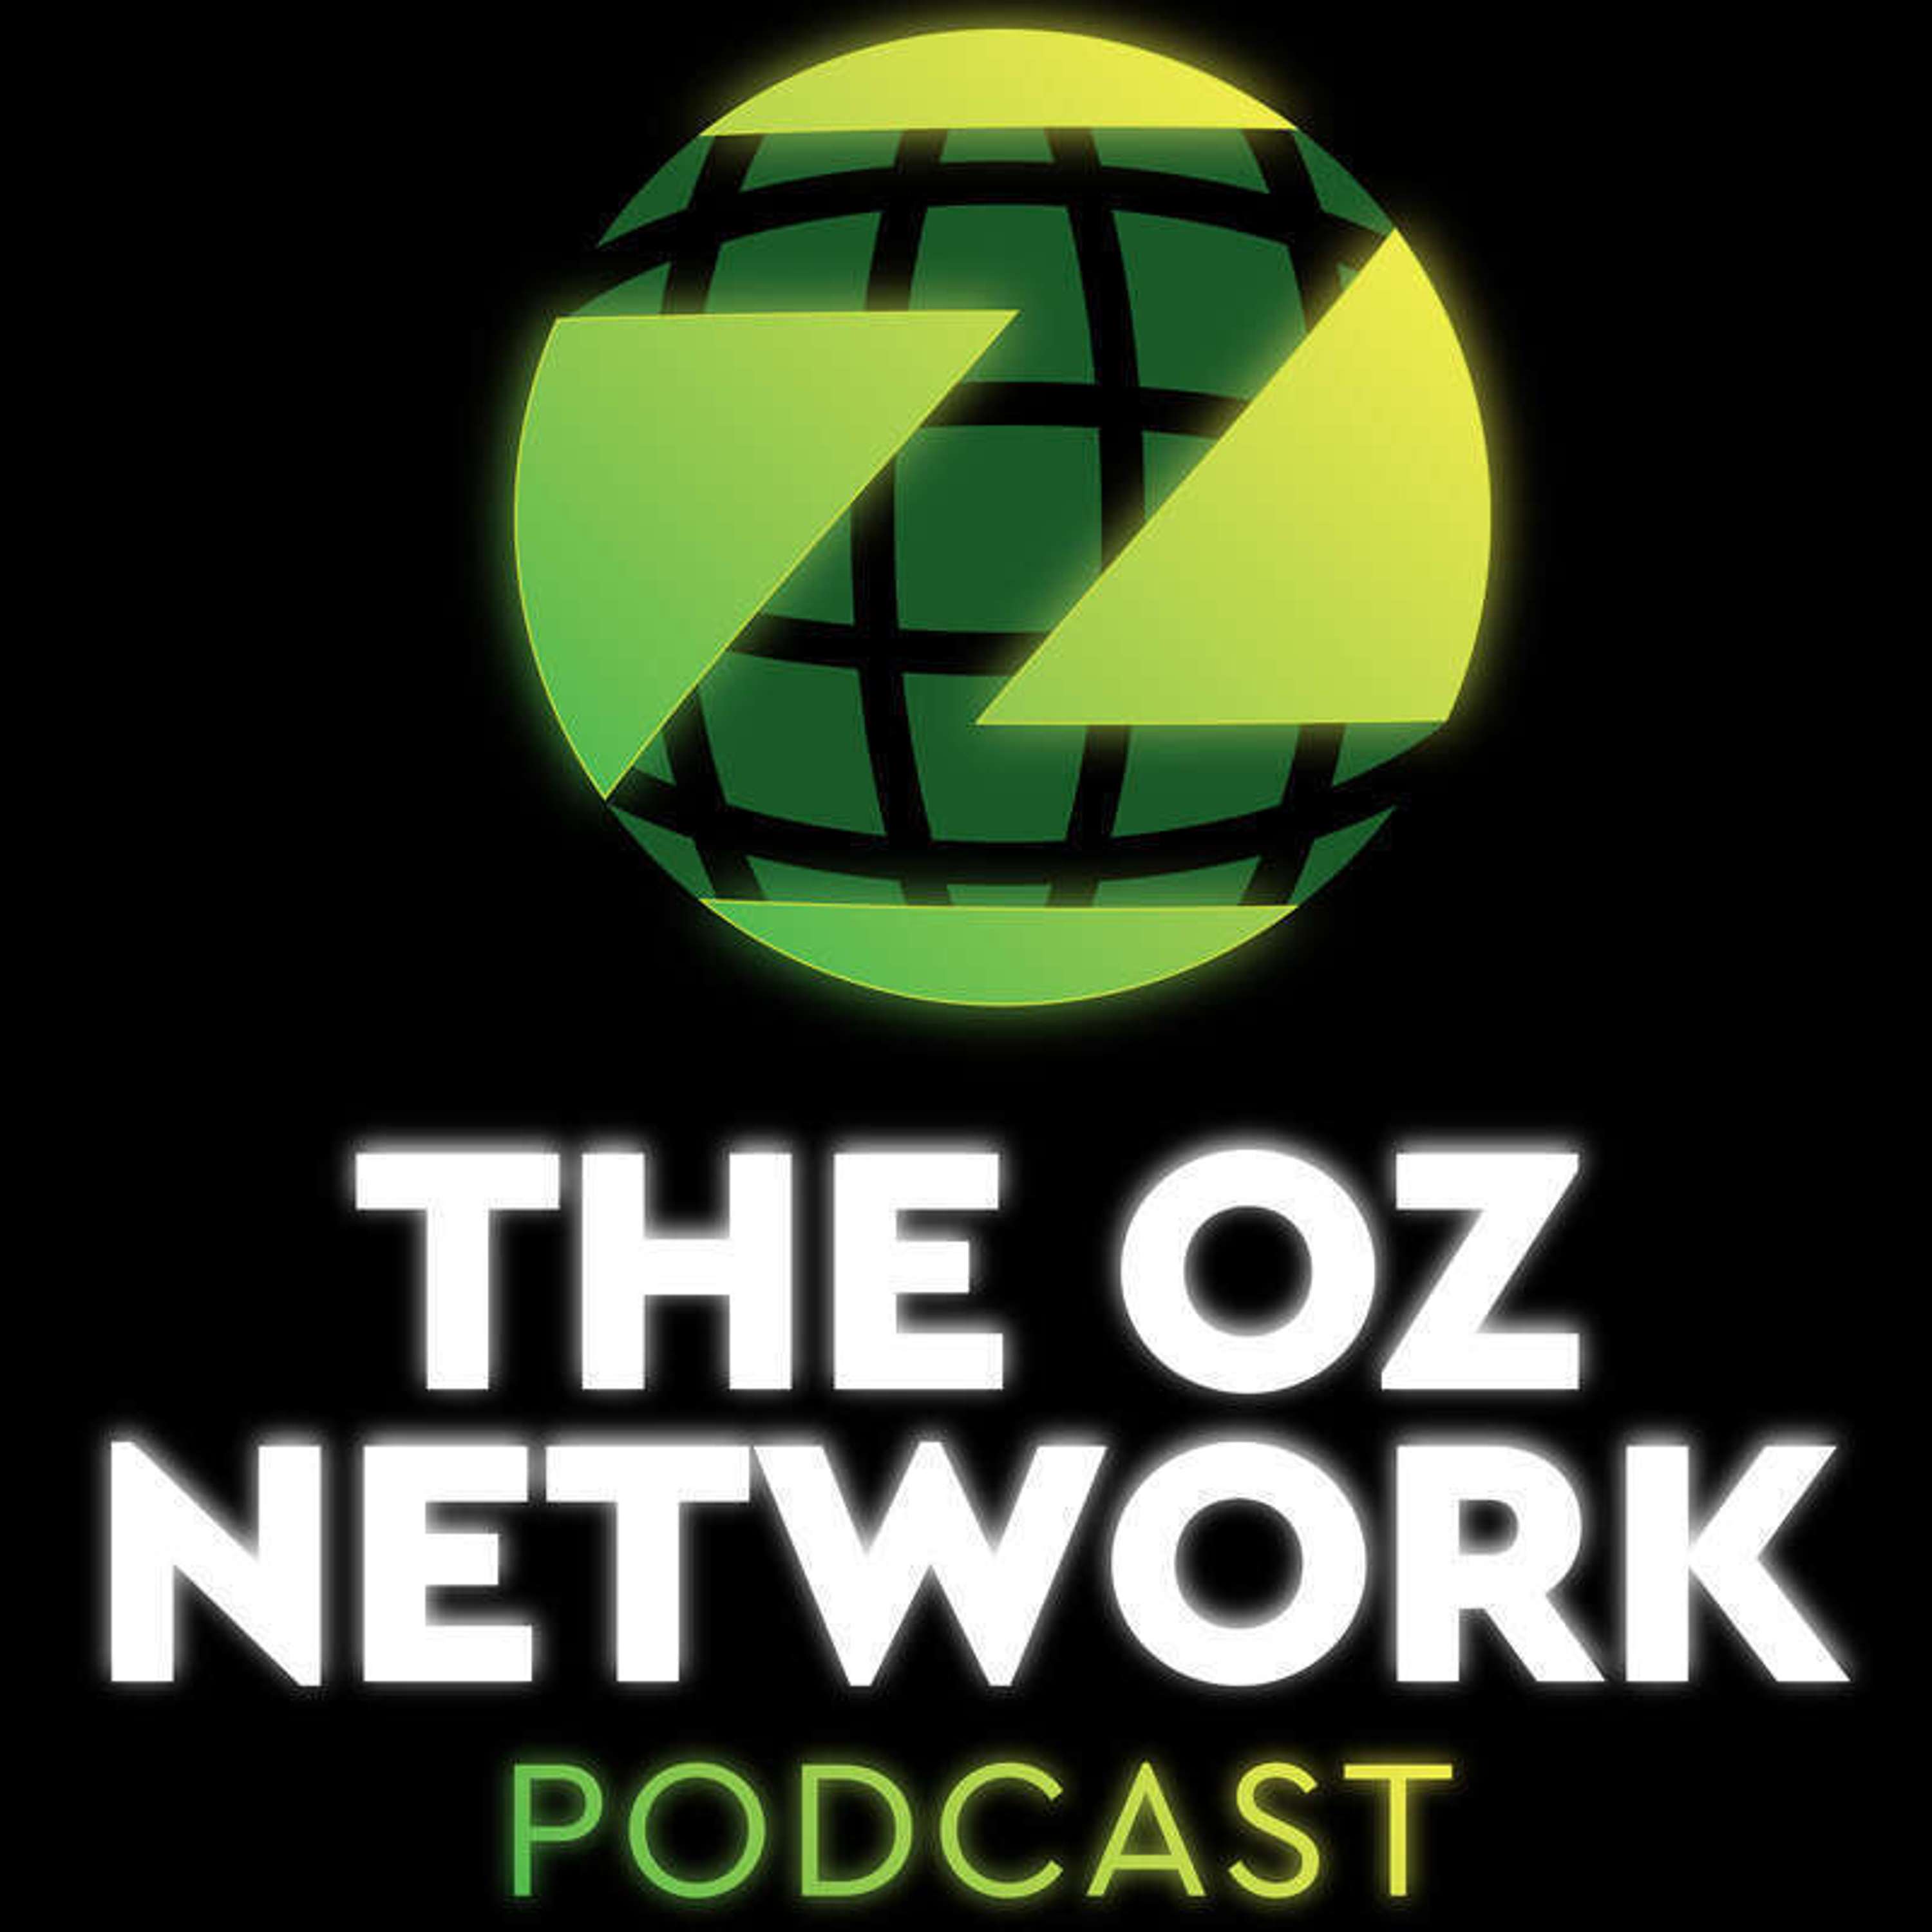 The Best Of Christmas Movie Recaps 1 - The Oz Network Movies